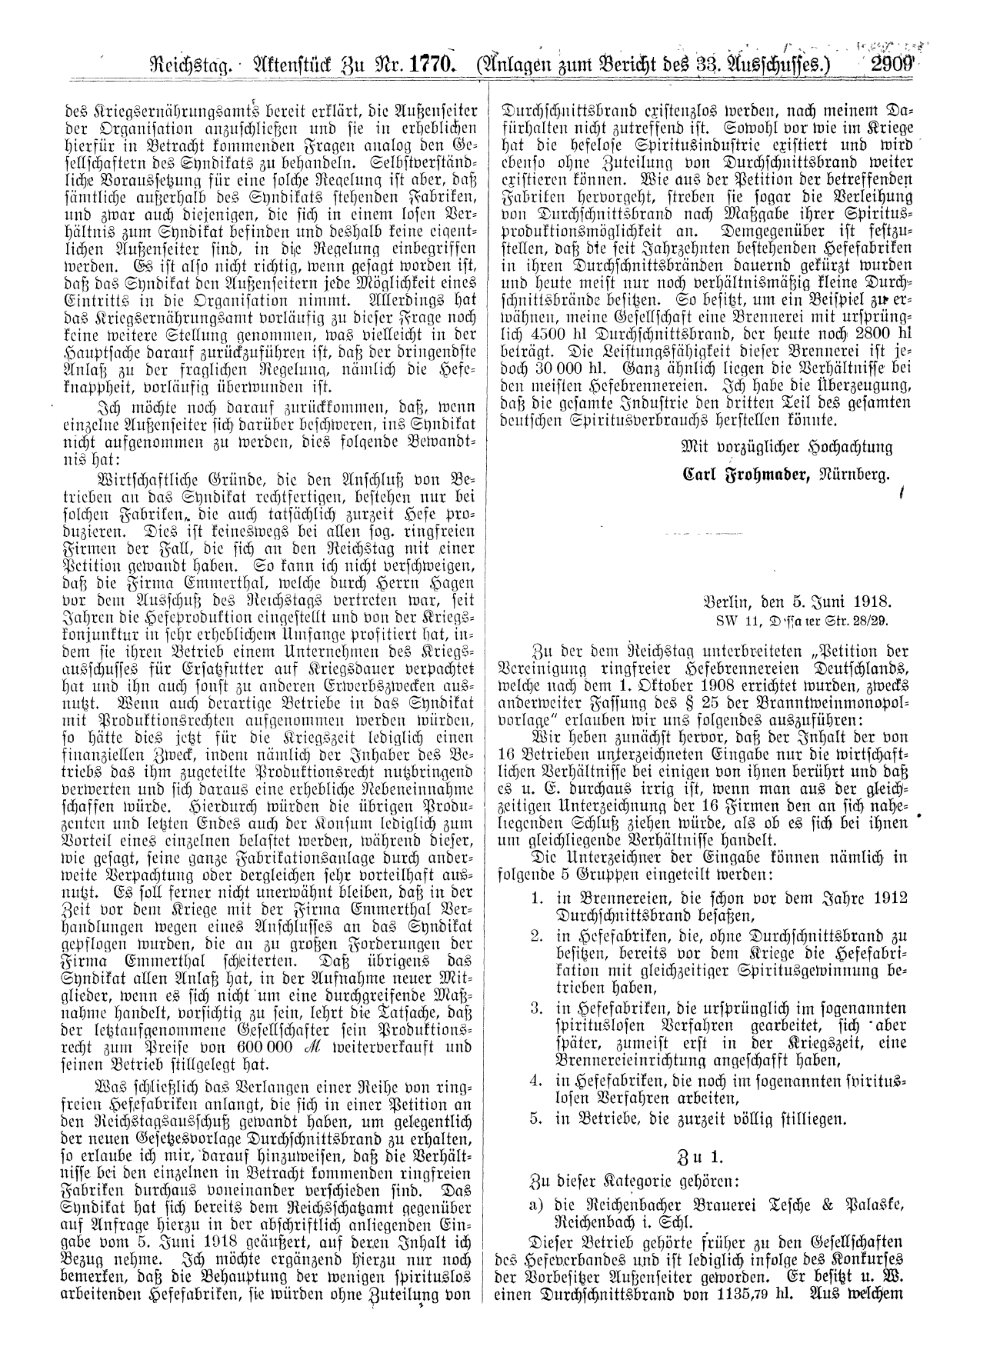 Scan of page 2909